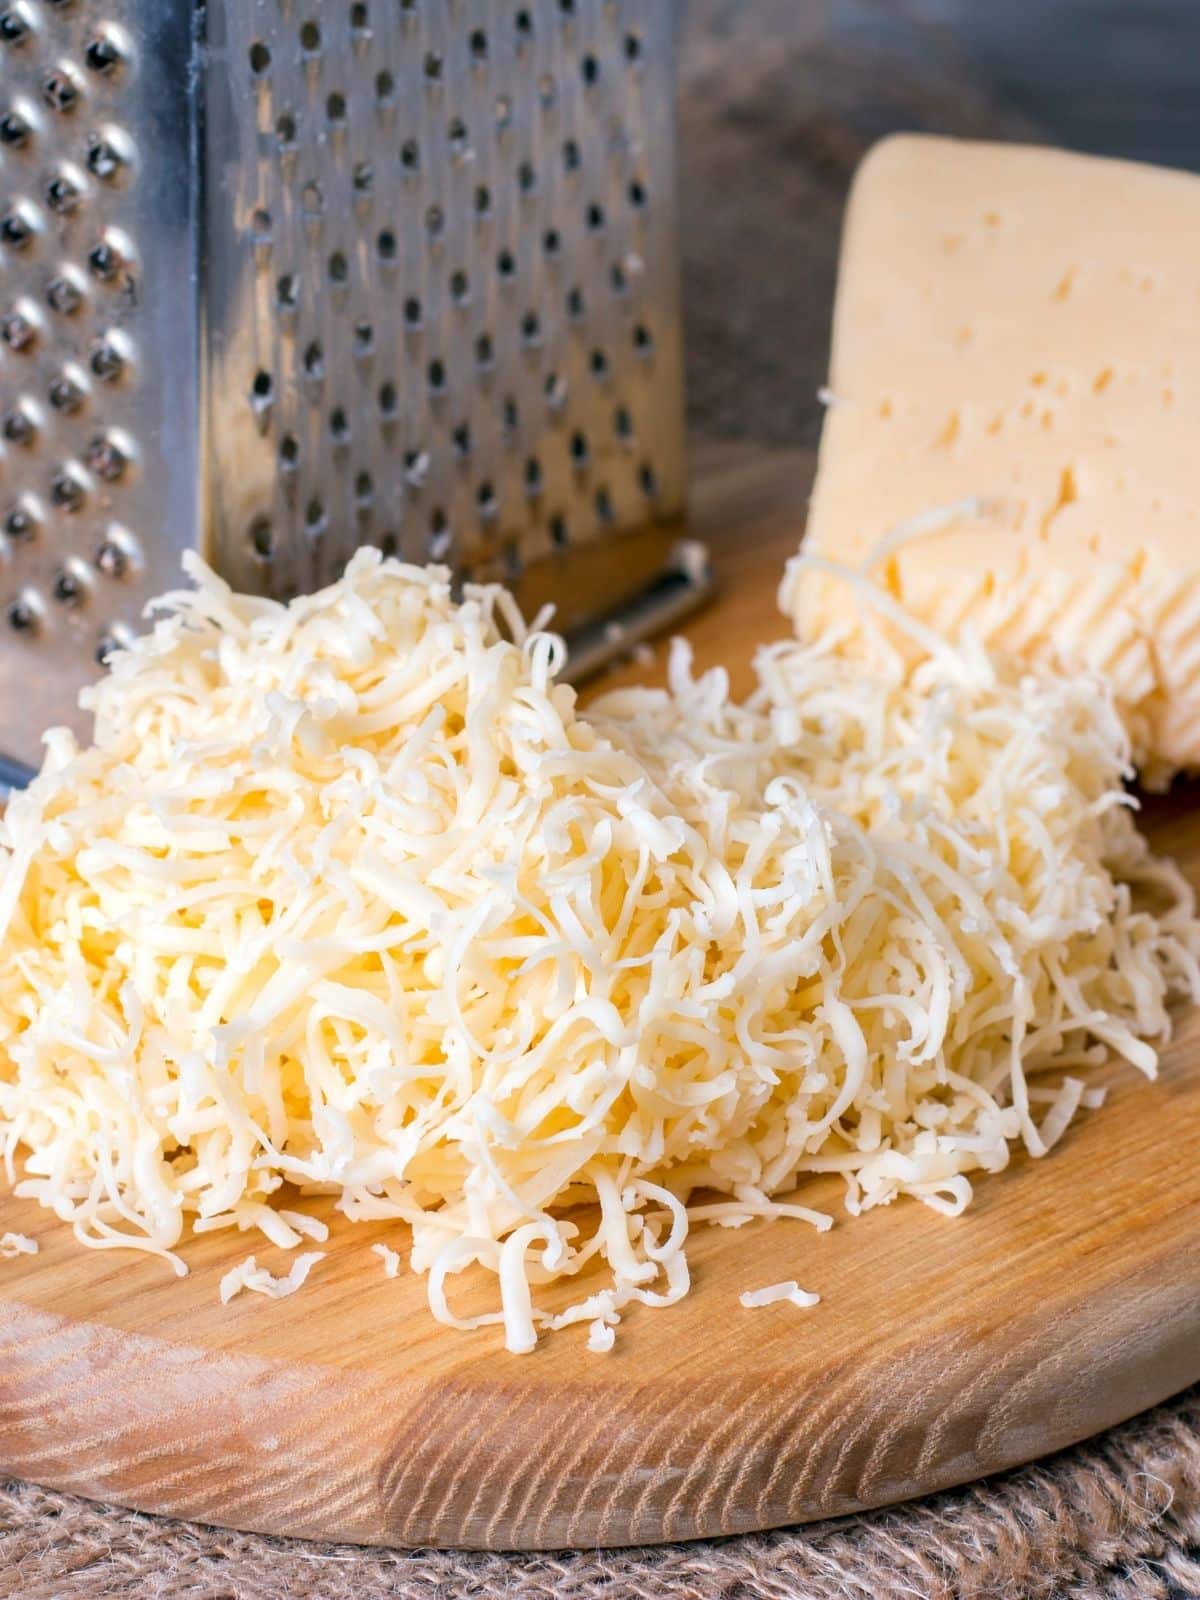 A wooden platter with shredded white cheese.